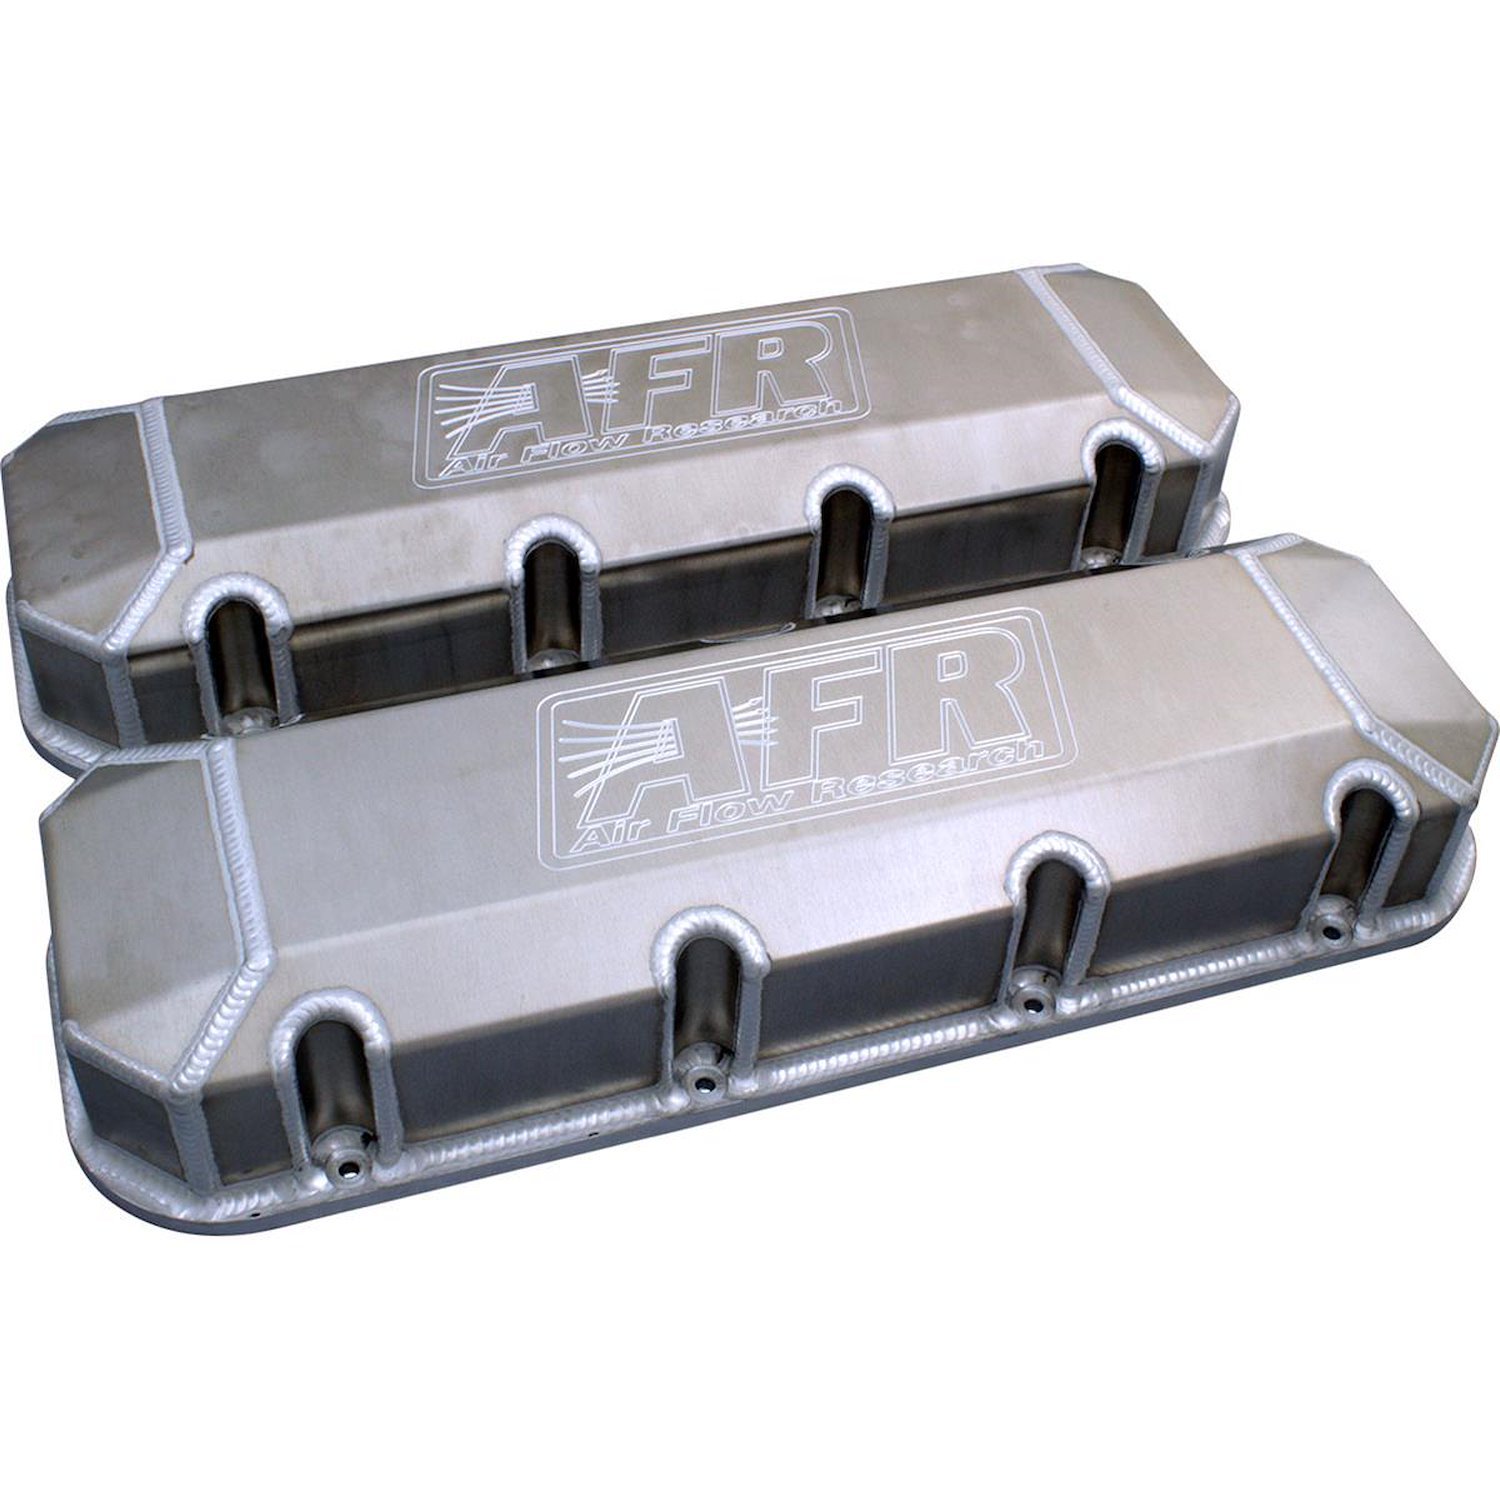 Fabricated Sheet Metal Valve Covers for Big Block Chevy w/18 Degree Heads